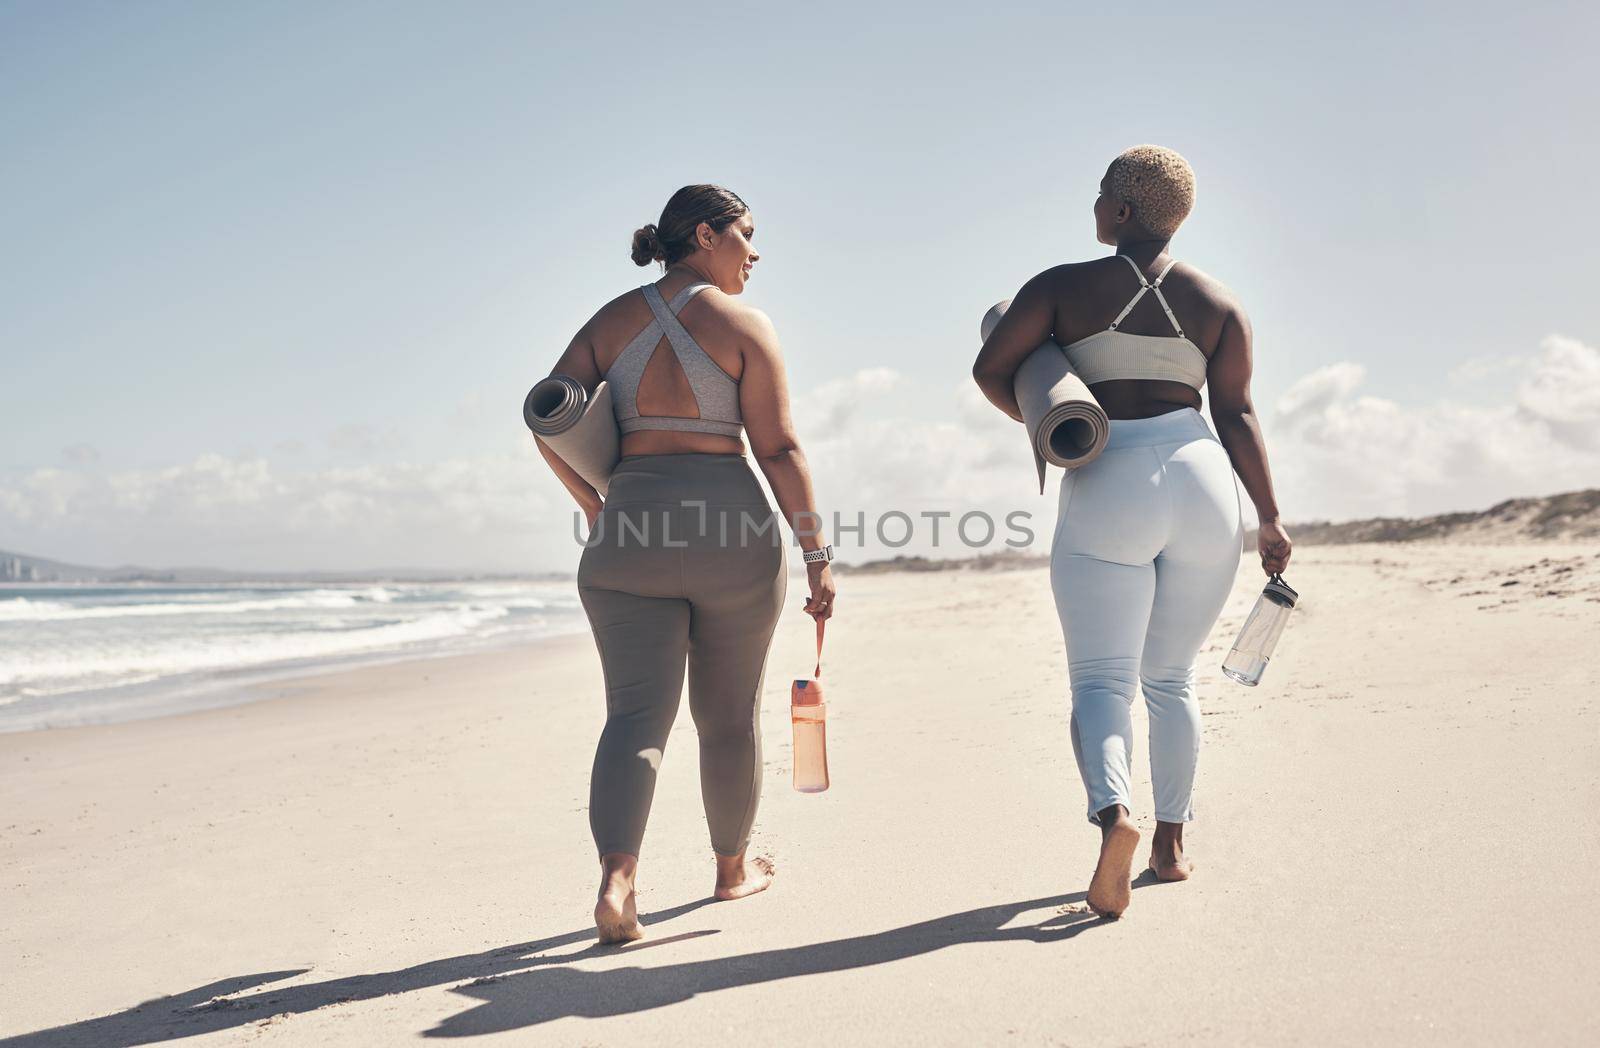 Weve made it a priority to practice yoga regularly. two young women walking on the beach with their yoga mats